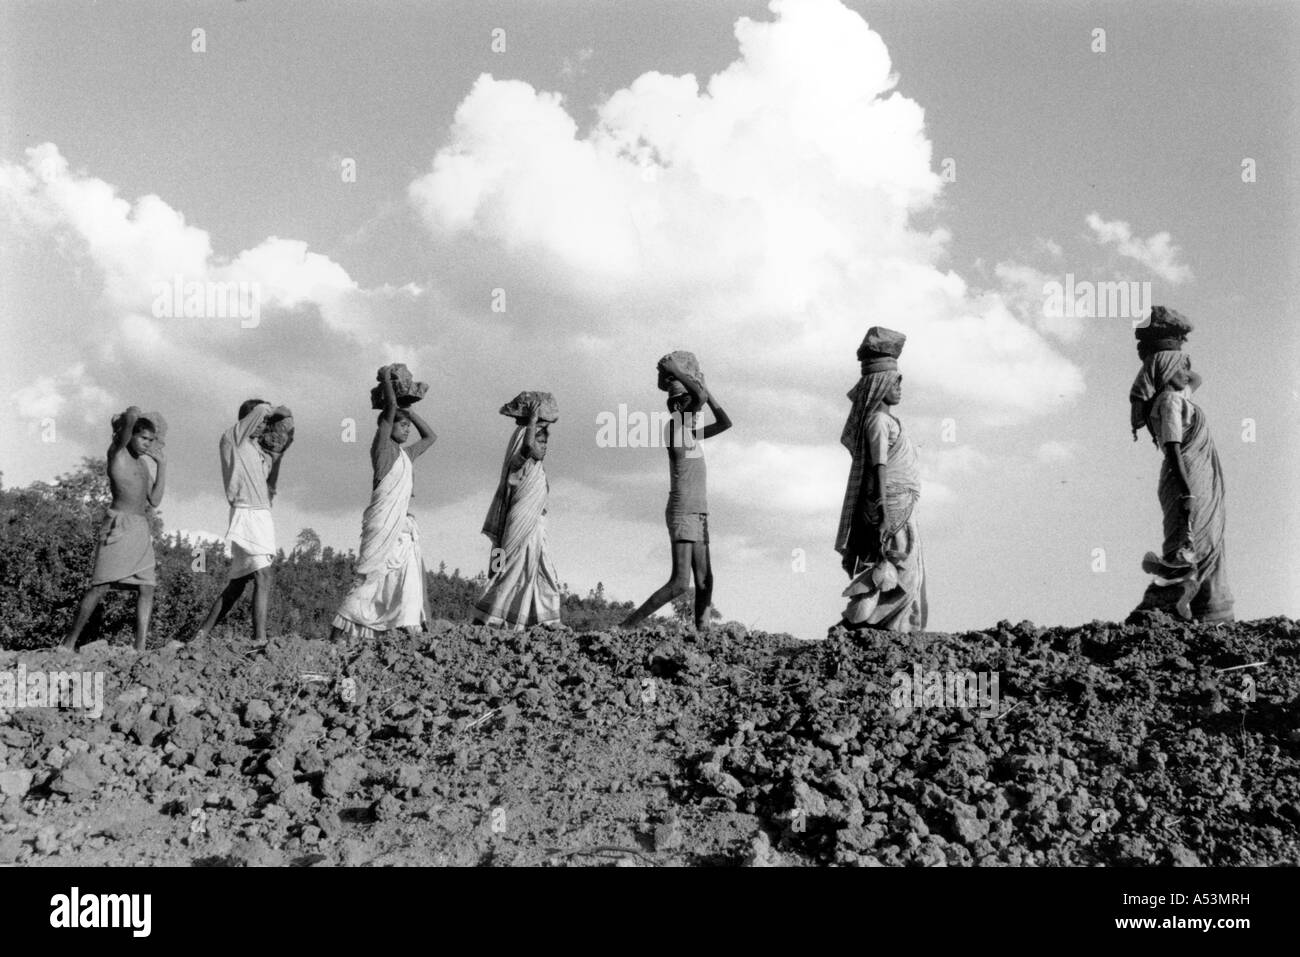 Painet ha1452 283 black and white labor carrying rocks for community dambuilding project bihar india country developing Stock Photo